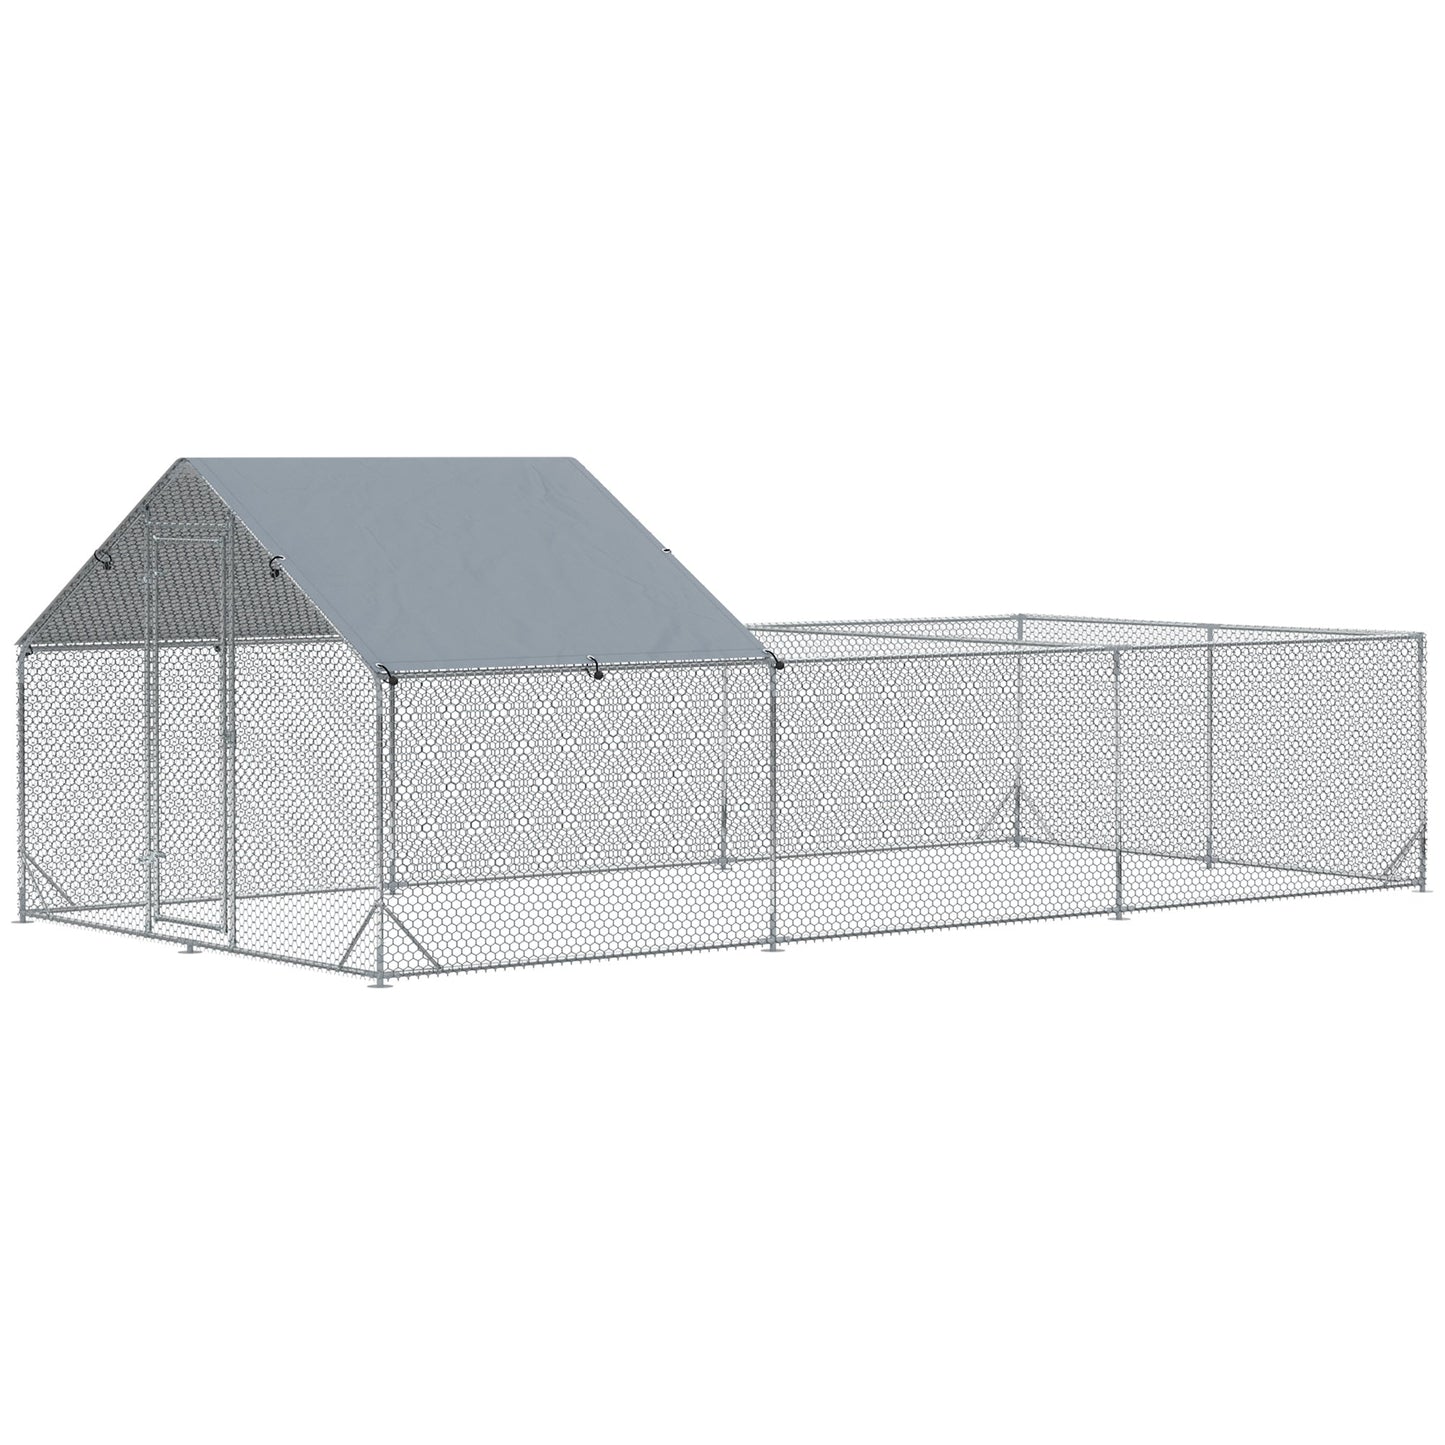 Pawhut Garden chicken coop for 15-18 galvanized with roof and lock, 600x300x195 cm